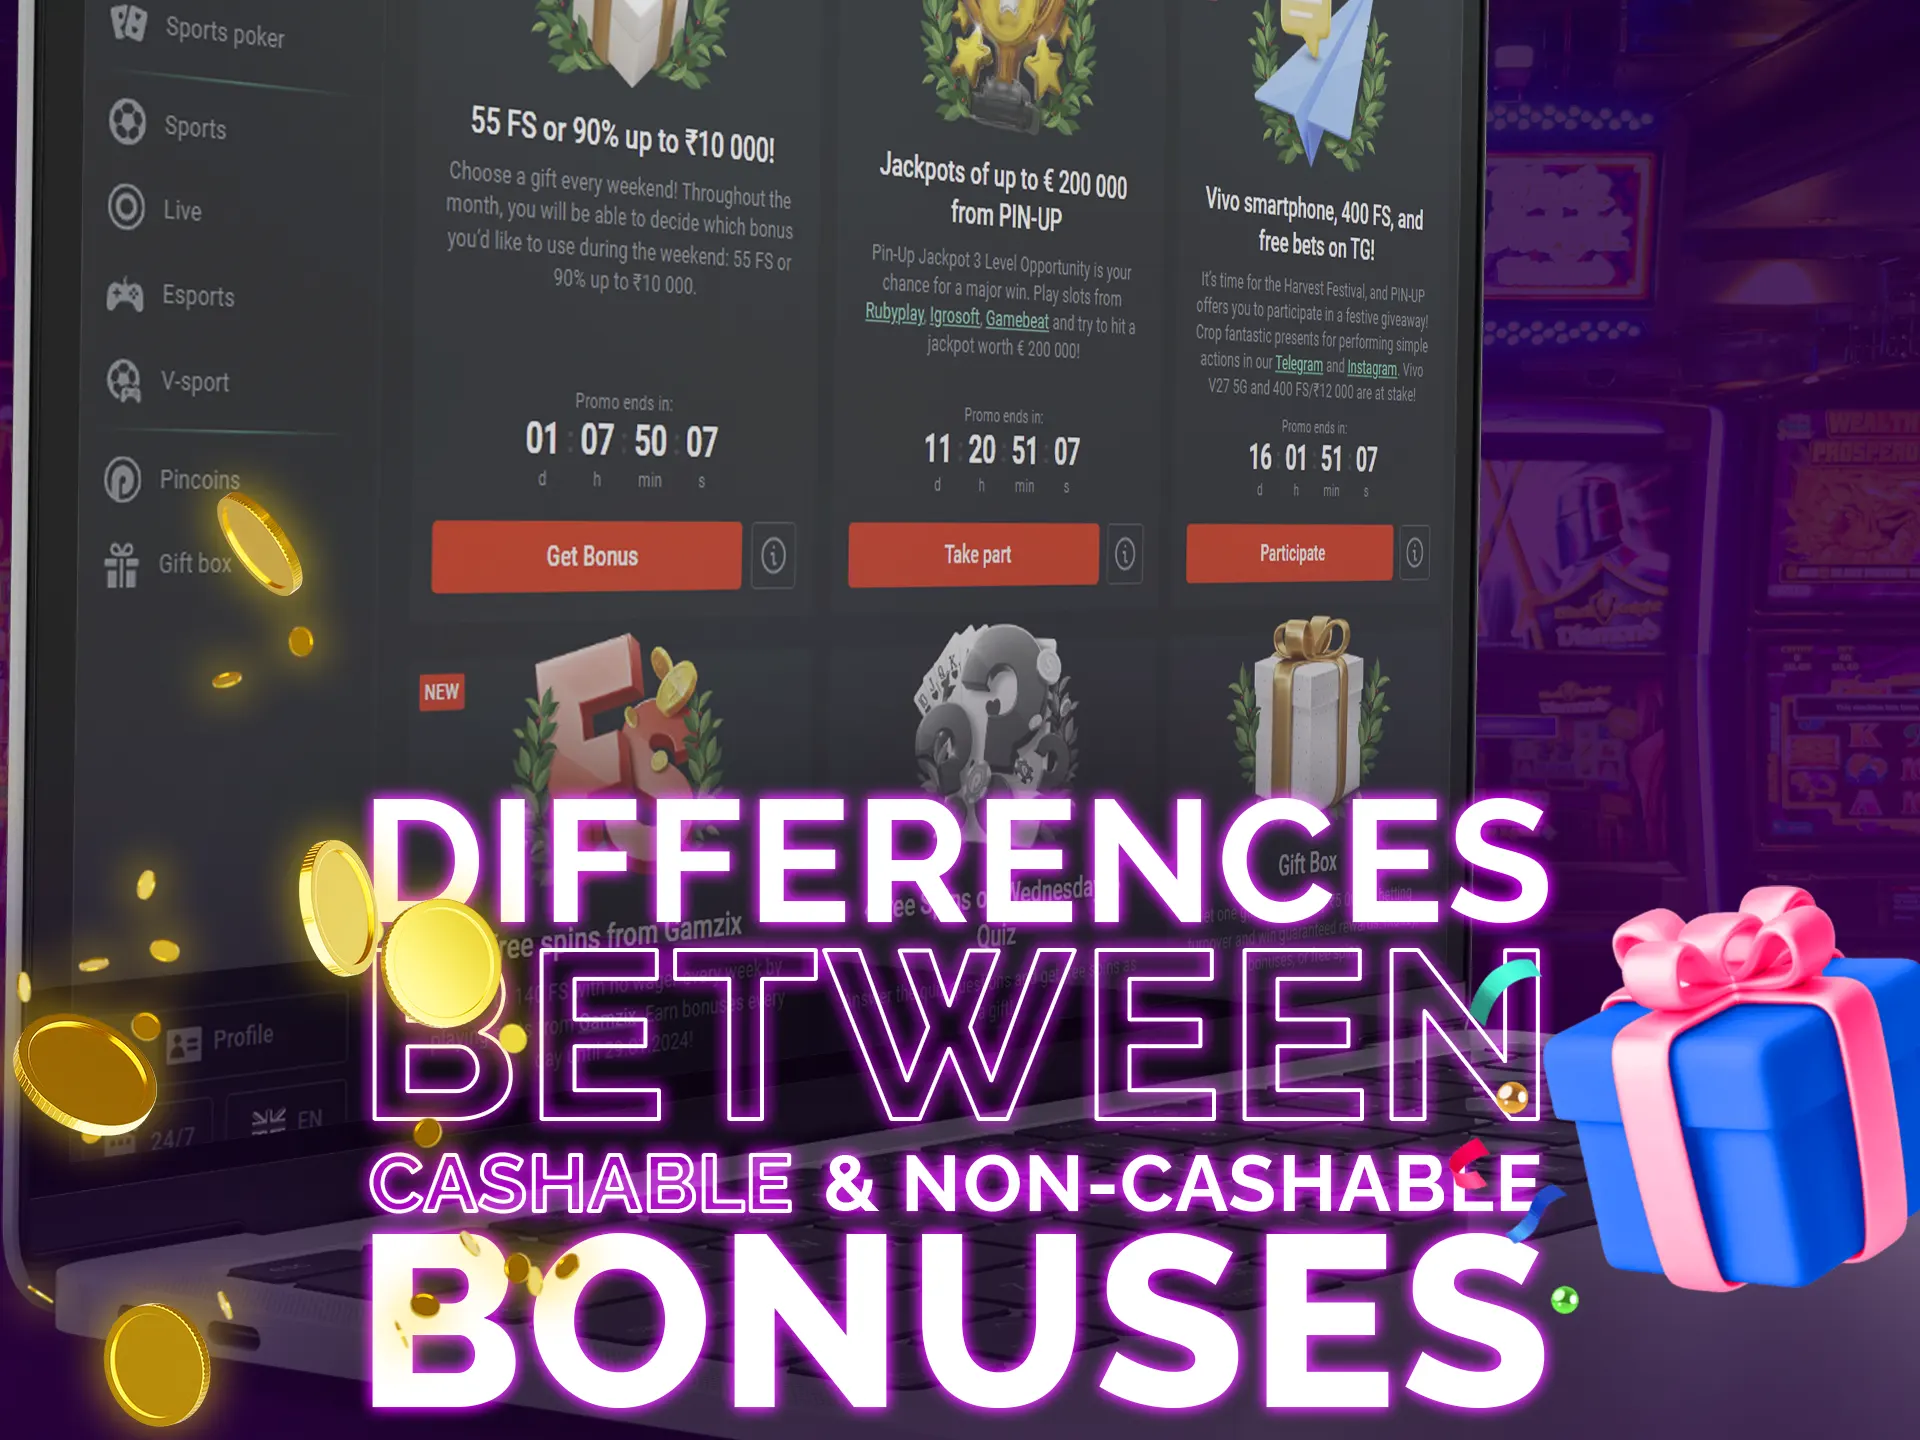 Certain casino bonuses can be withdrawn, while others are for betting.